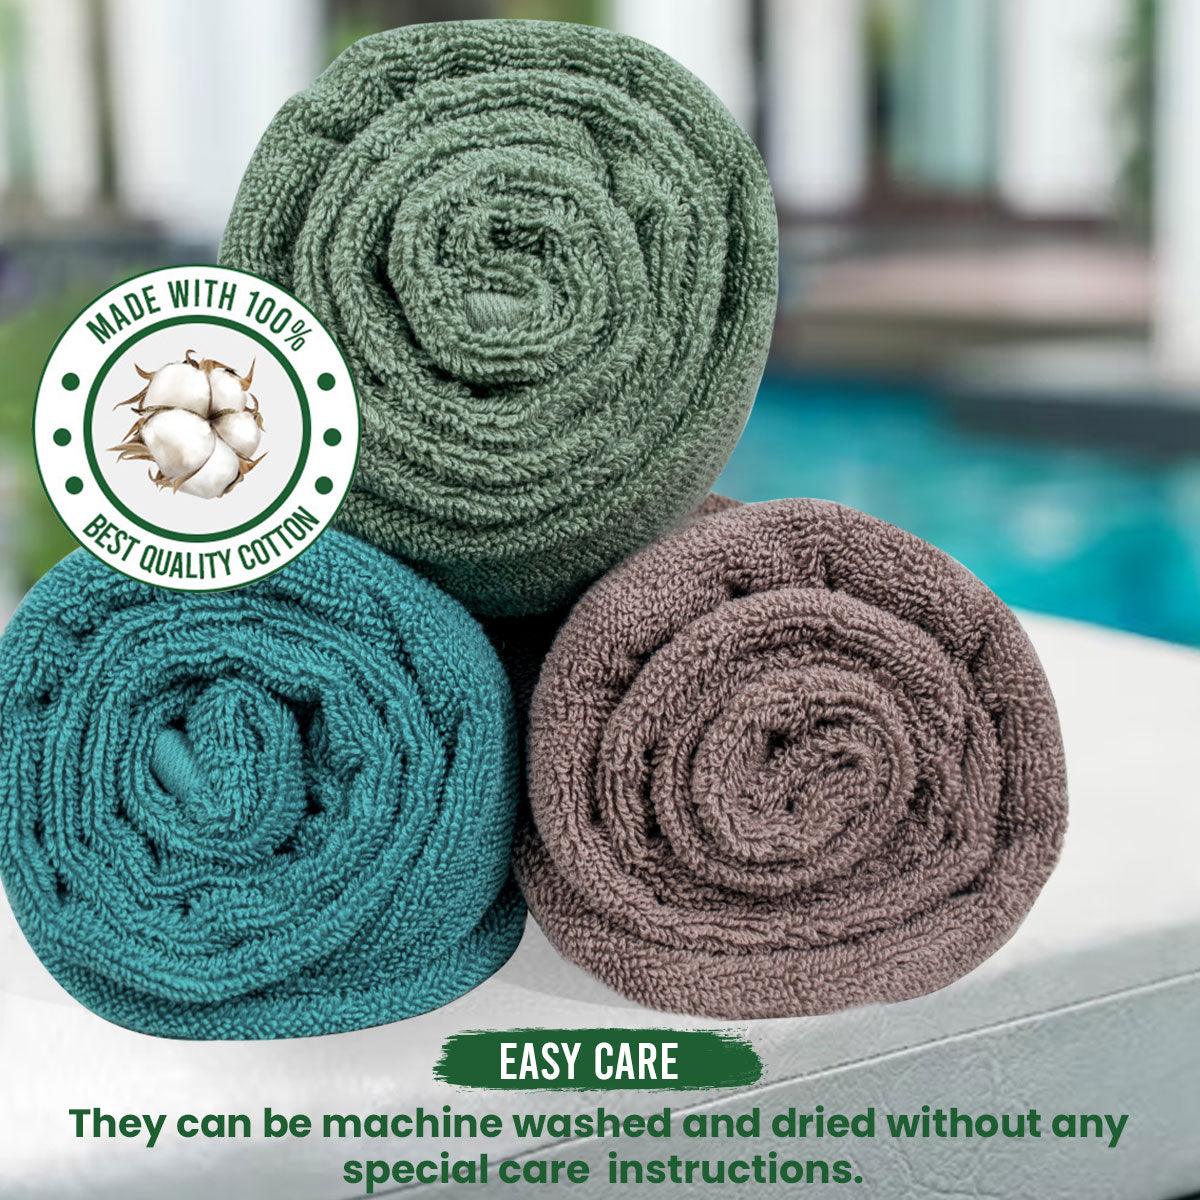 540 GSM Martin Hand Towel Set Of 3 | Ultra Soft & Highly Absorbent Towels | Green, Blugrn, Turquoise - Rangoli